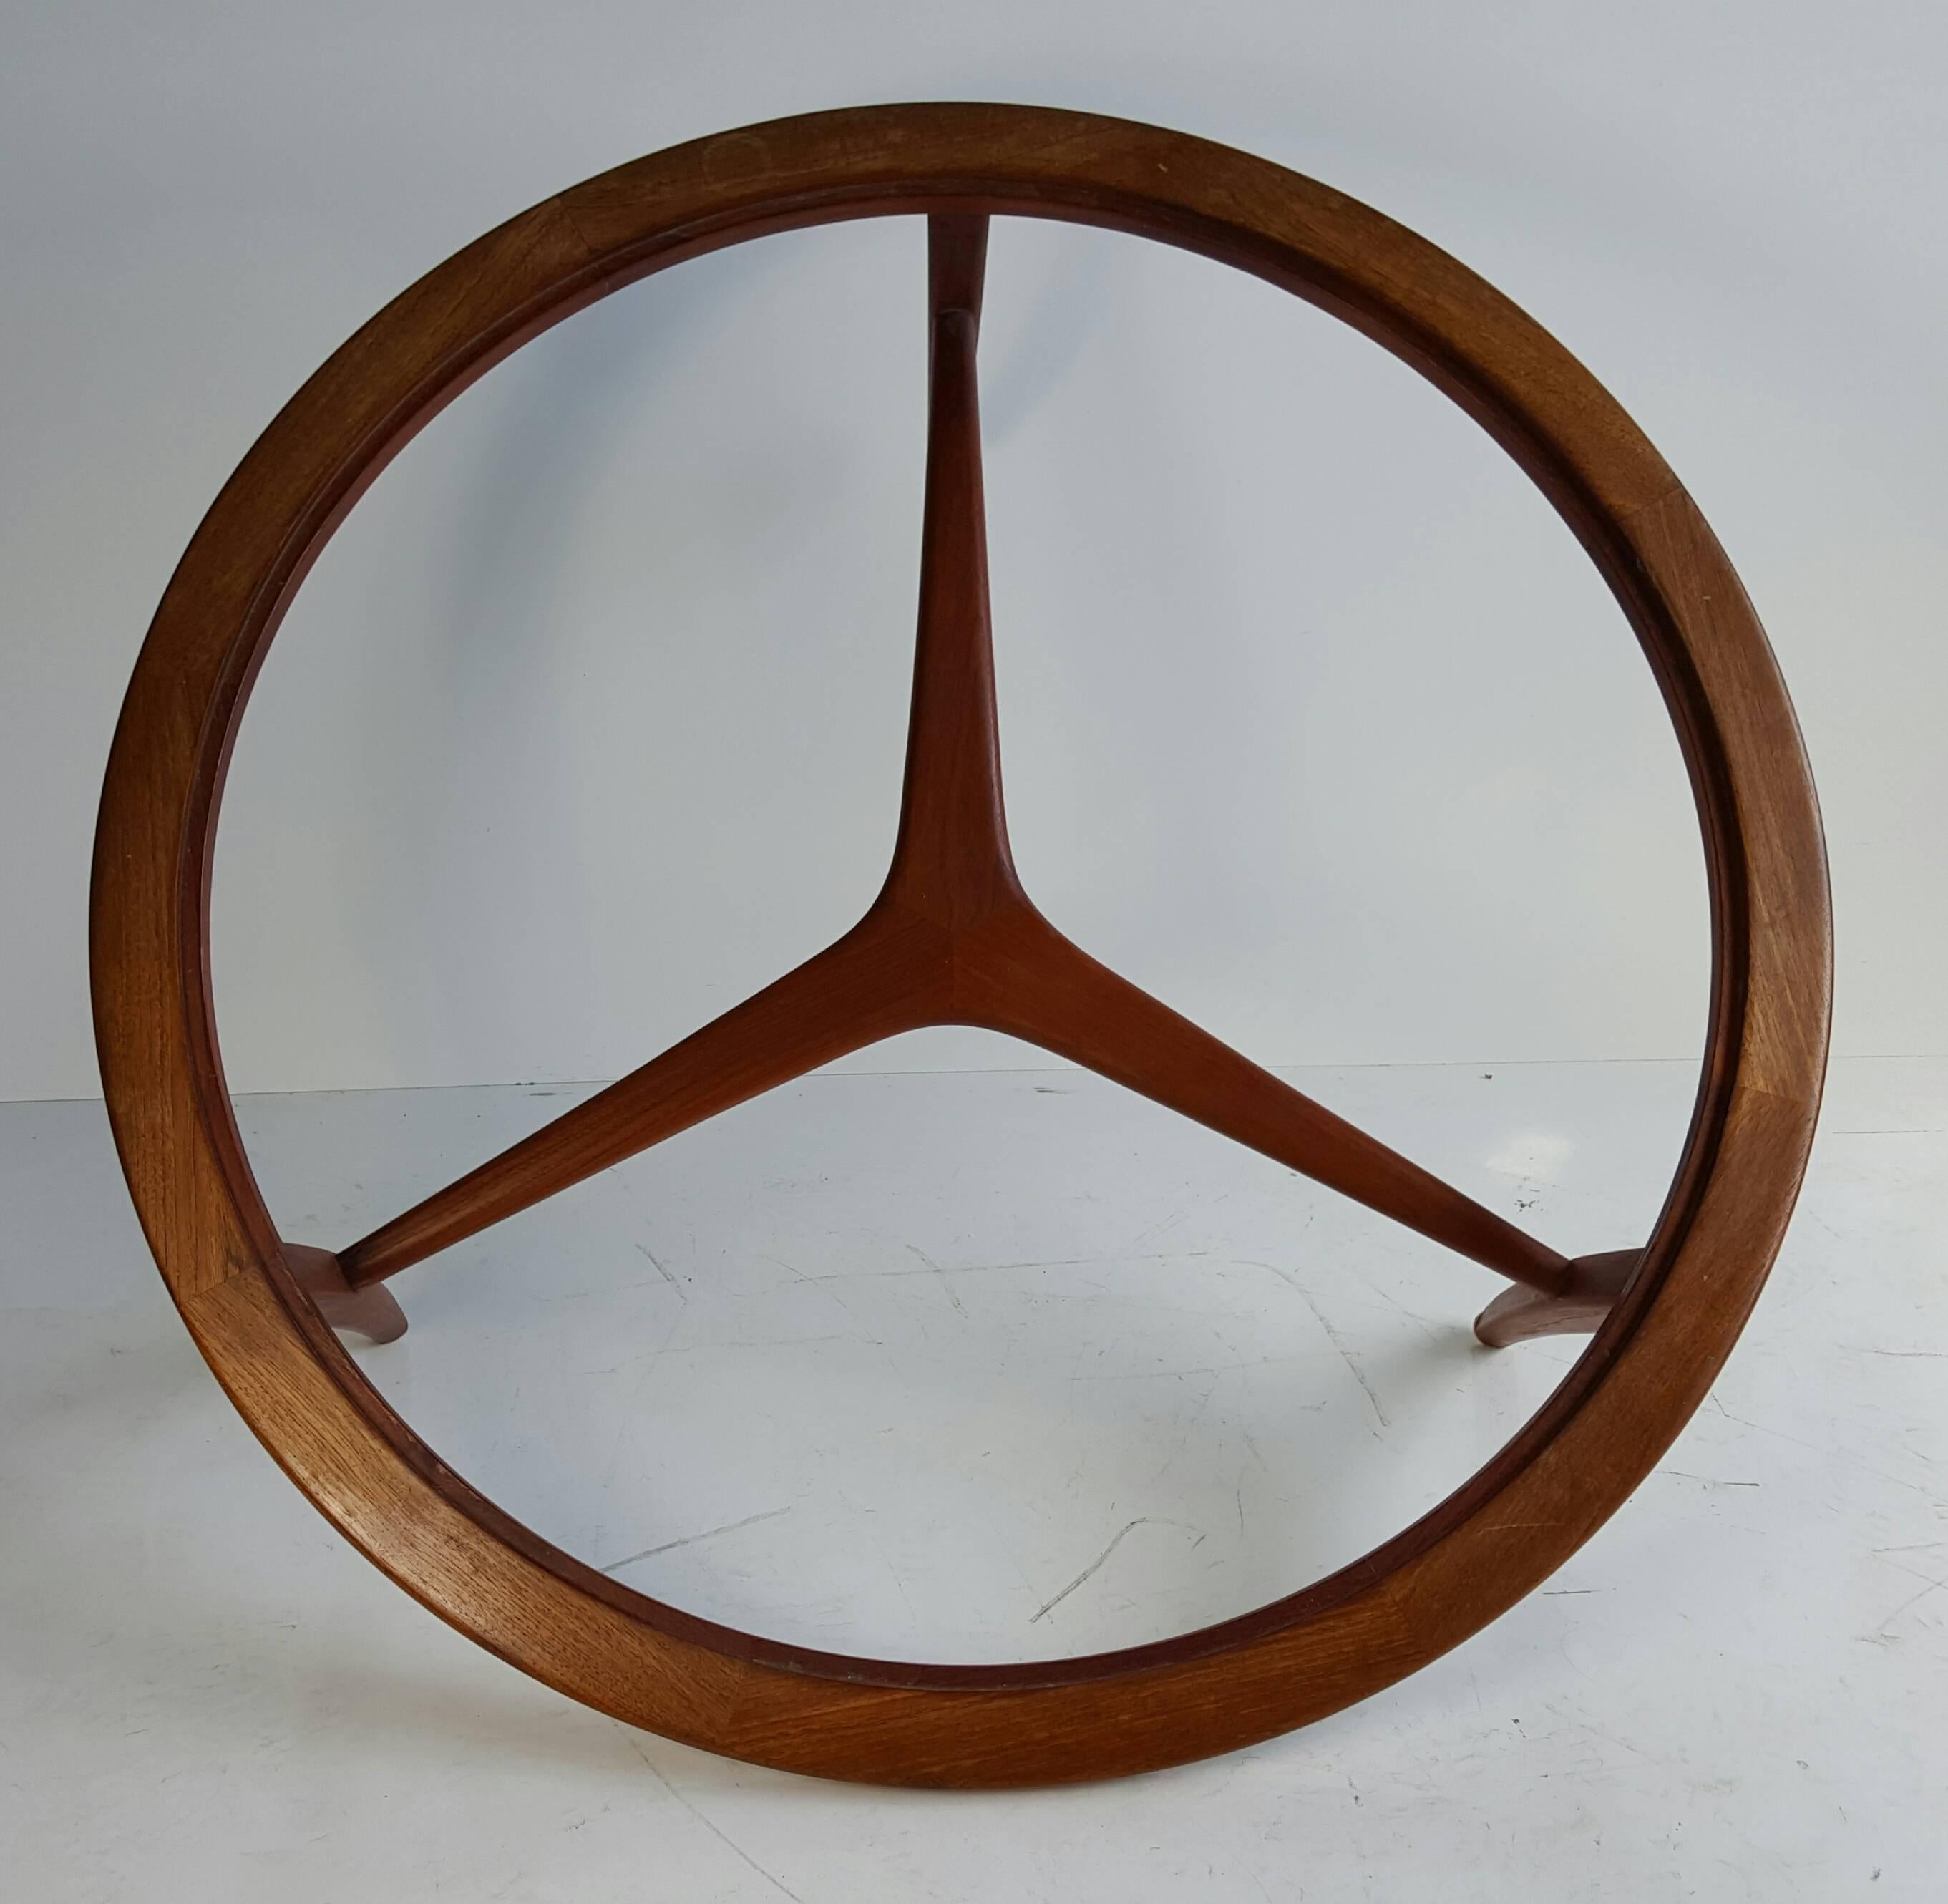 Nice modernist cocktail table, solid teakwood construction, unusual strecher, Mercedes Benz logo design, quality construction and wood joinery, glass insert needed.